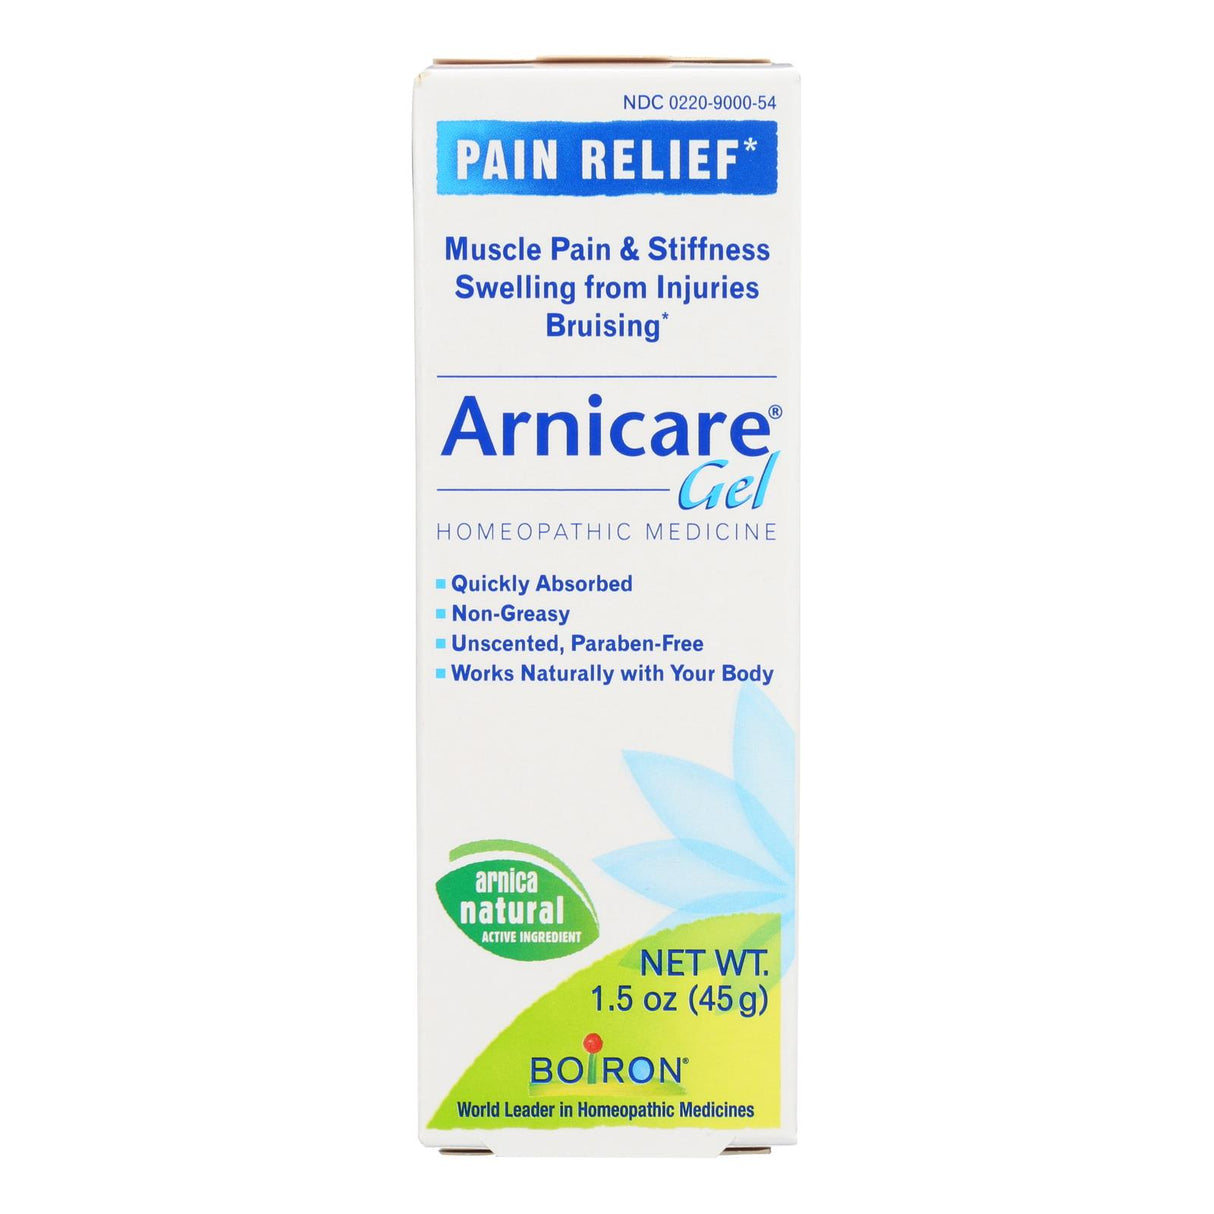 Boiron Arnica Gel: Effective Relief for Bruises, Sore Muscles, and Swelling (1.5 Oz.) - Cozy Farm 